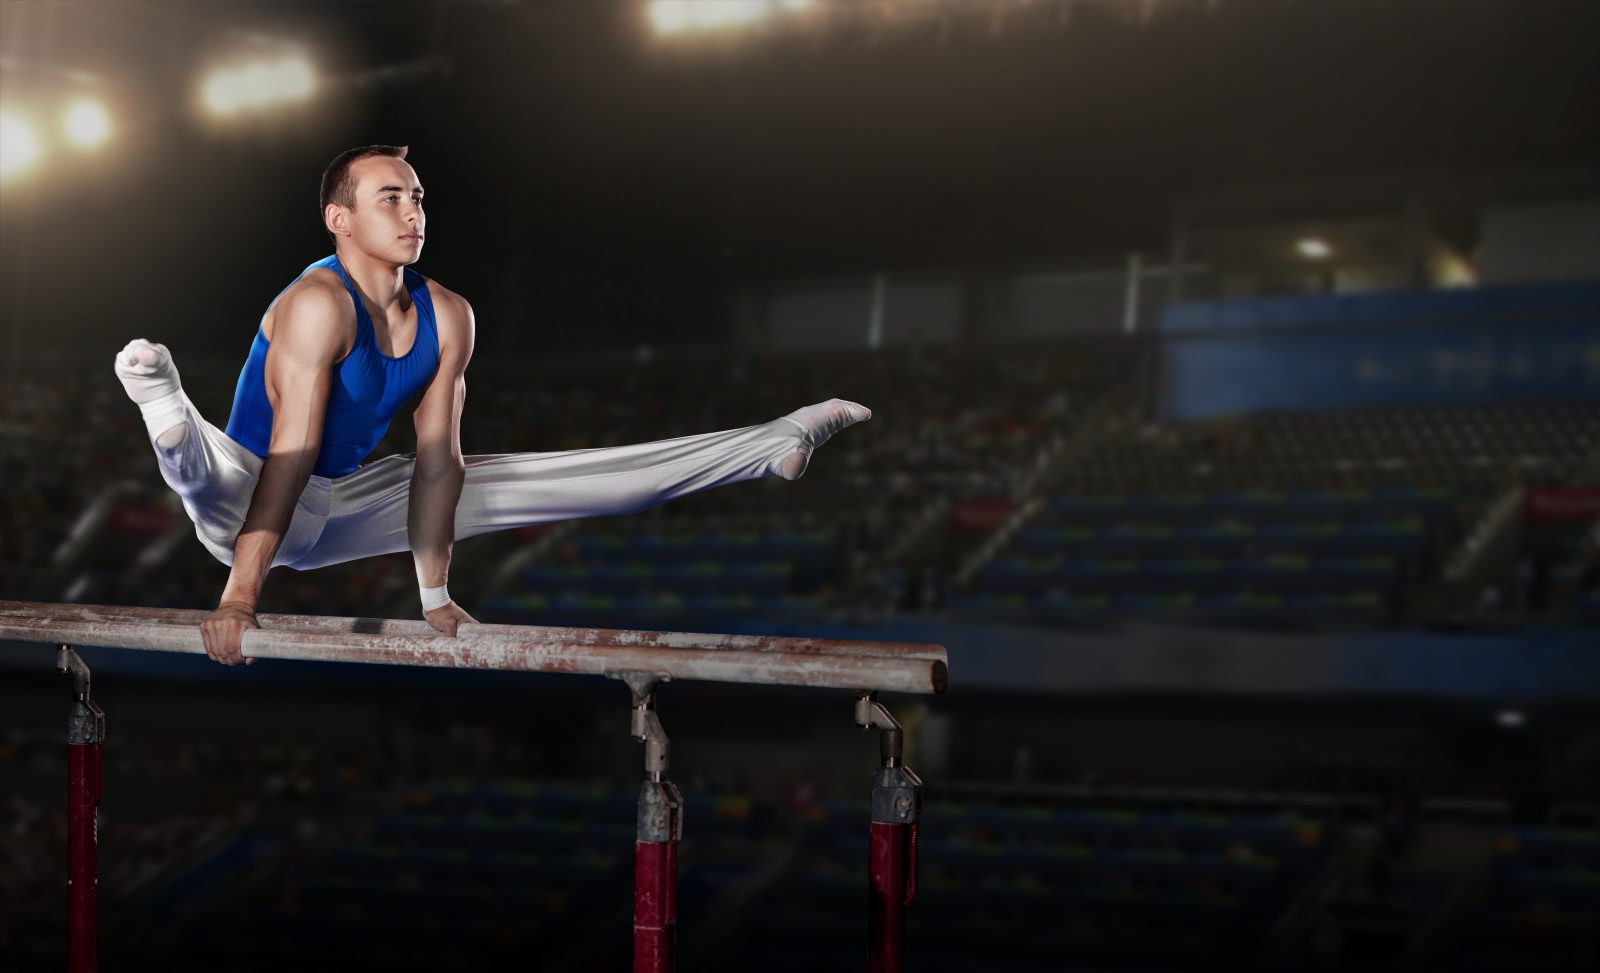 portrait of young man gymnasts